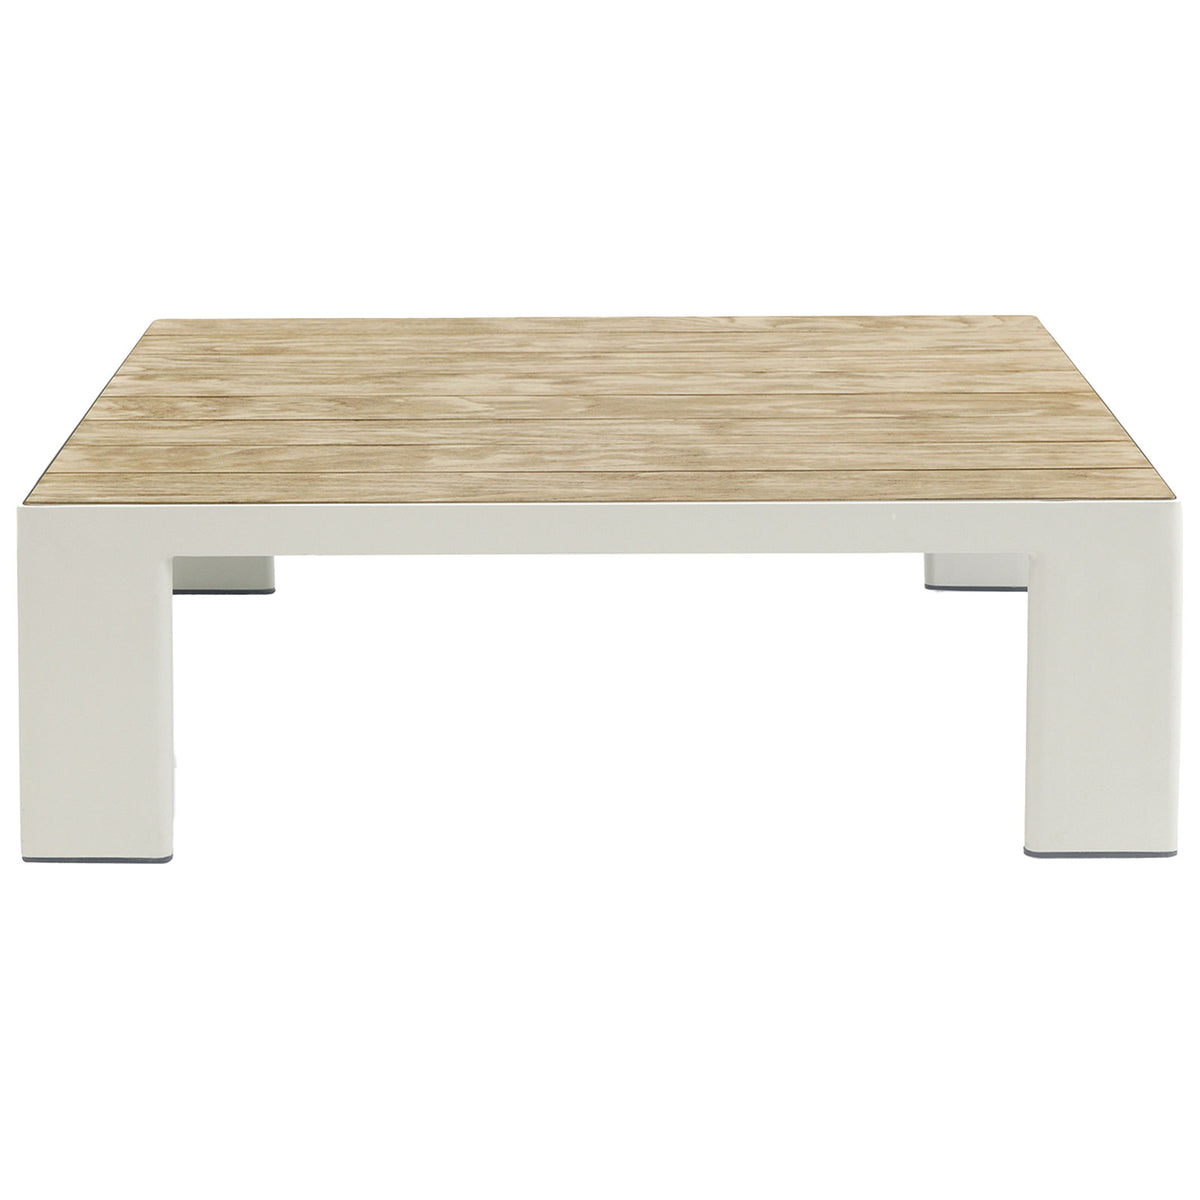 Esedra Square Outdoor Coffee Table